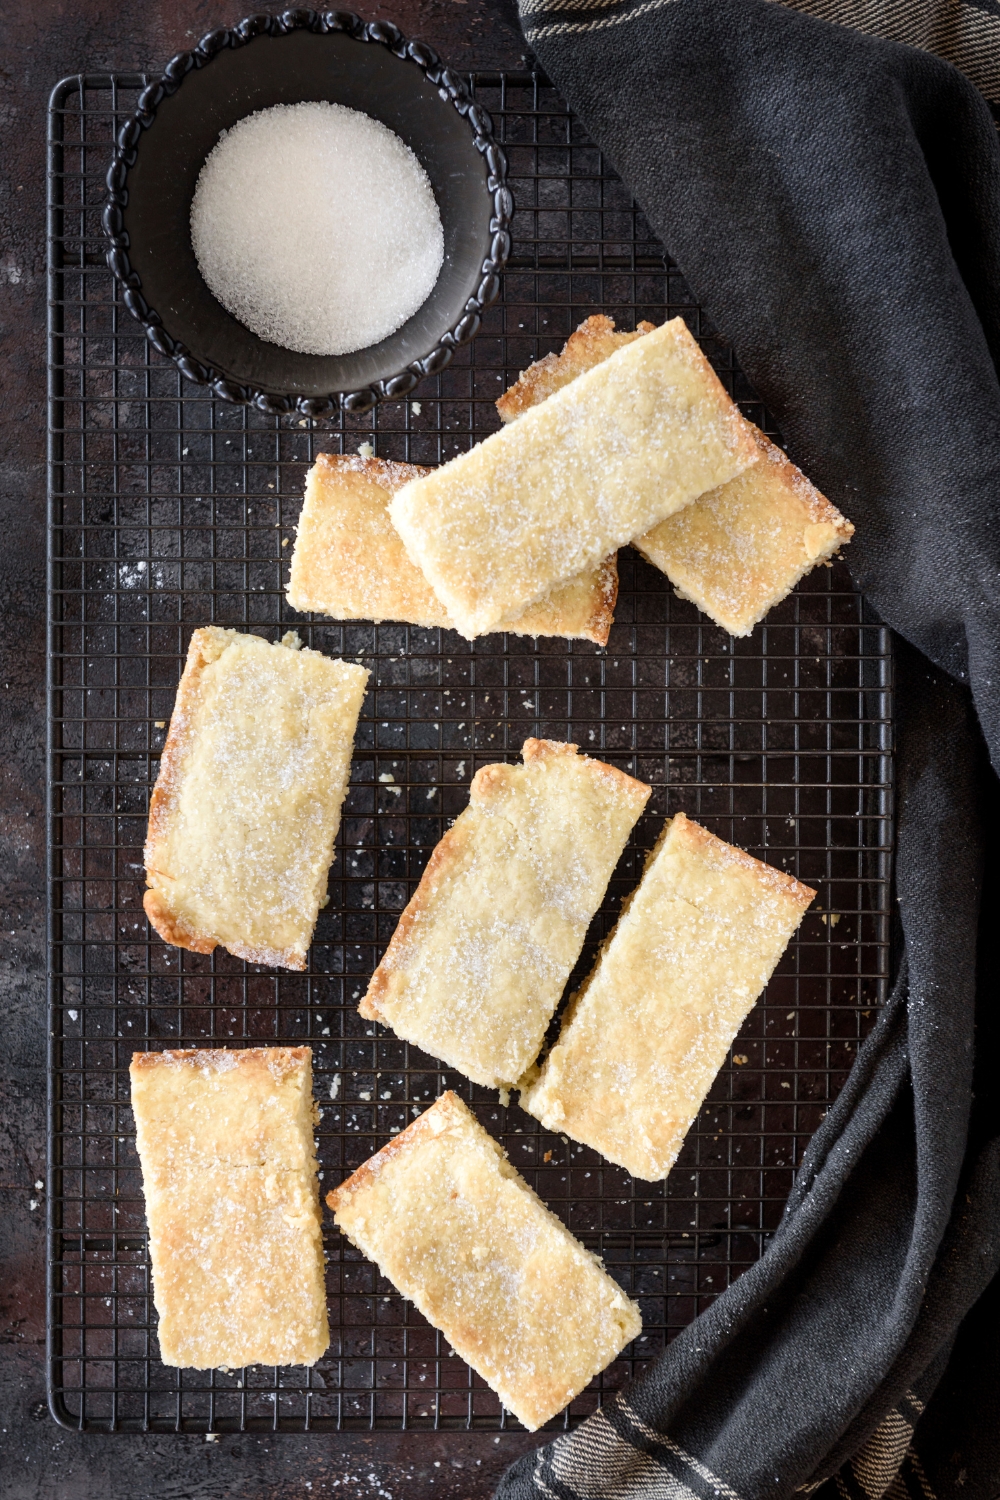 Rectangular biscuits on a cooling rack sprinkled with sugar.